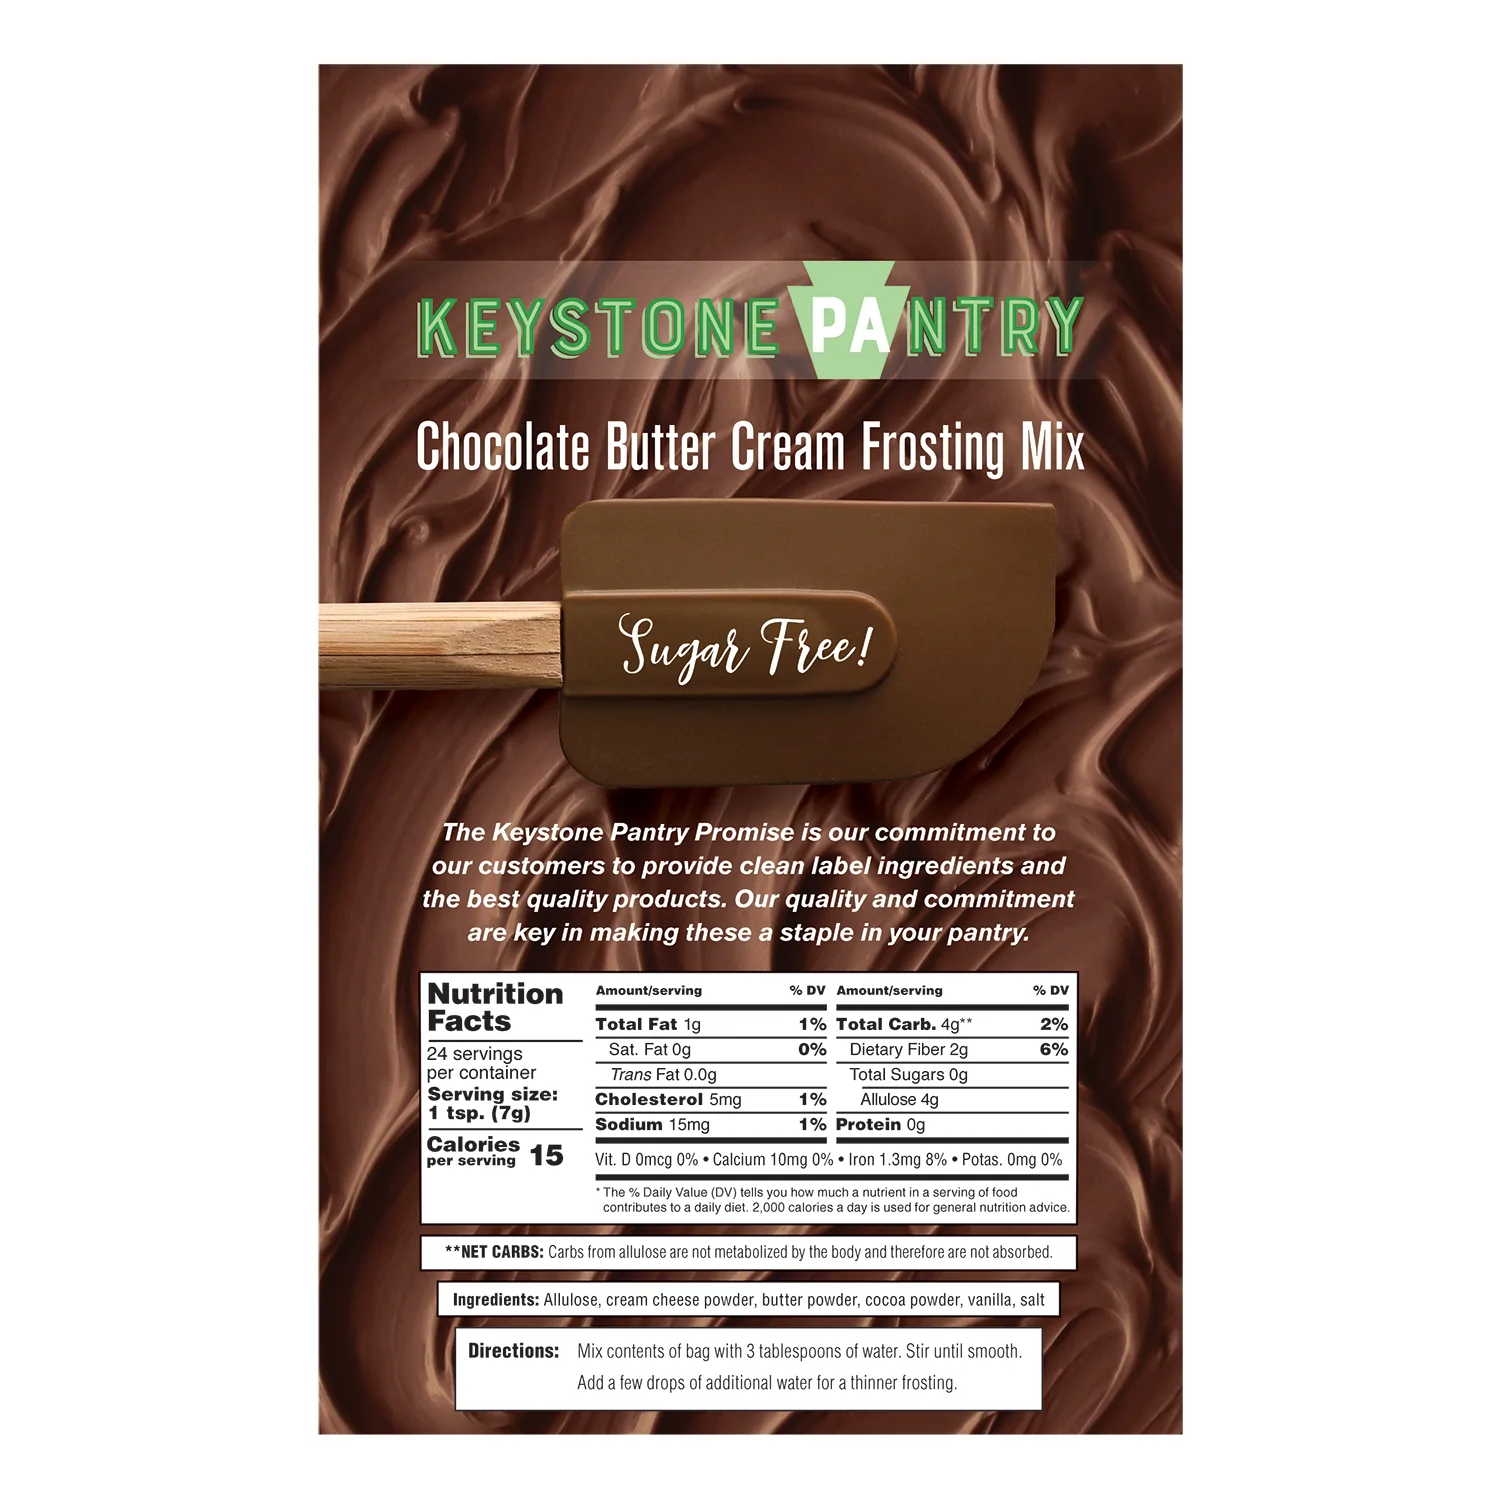 Gluten Free Chocolate Frosting for your Healthy Sweet Treats